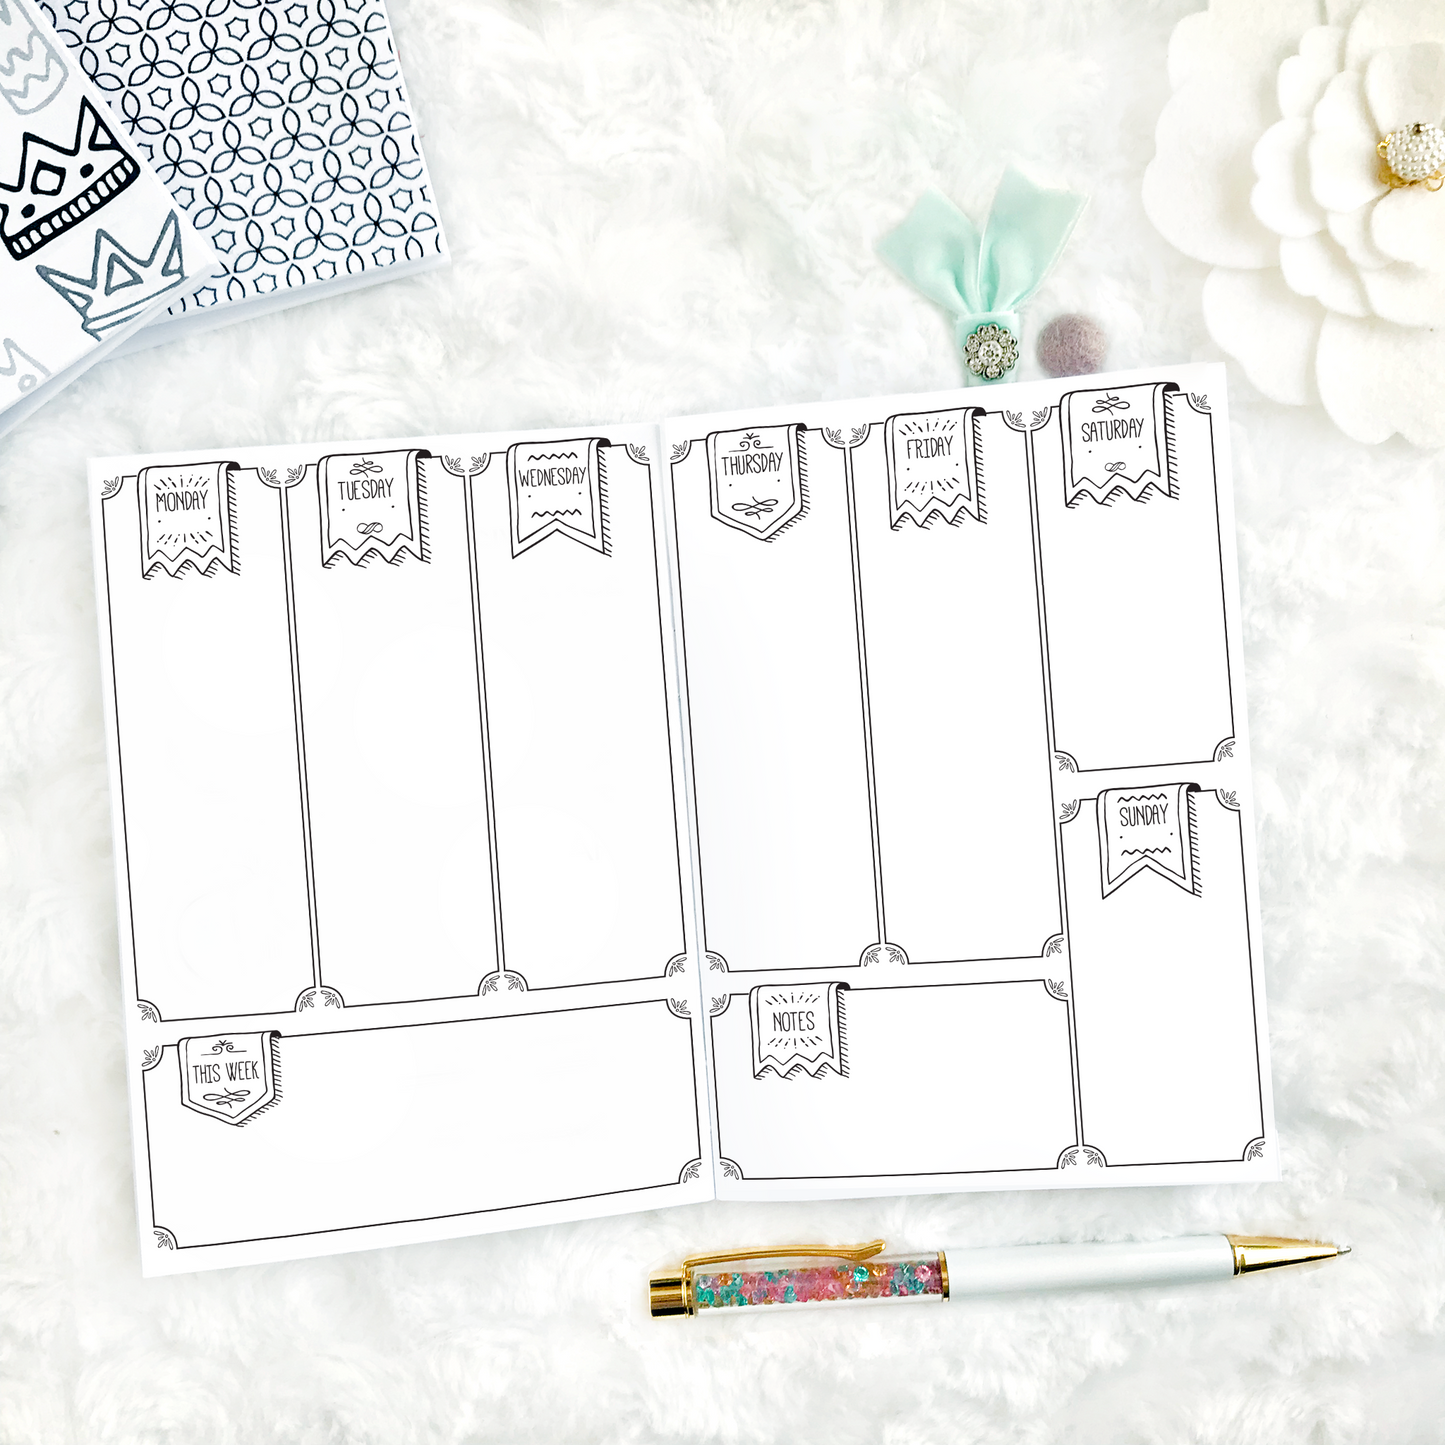 The Pheobe All Inclusive Planner | Printable